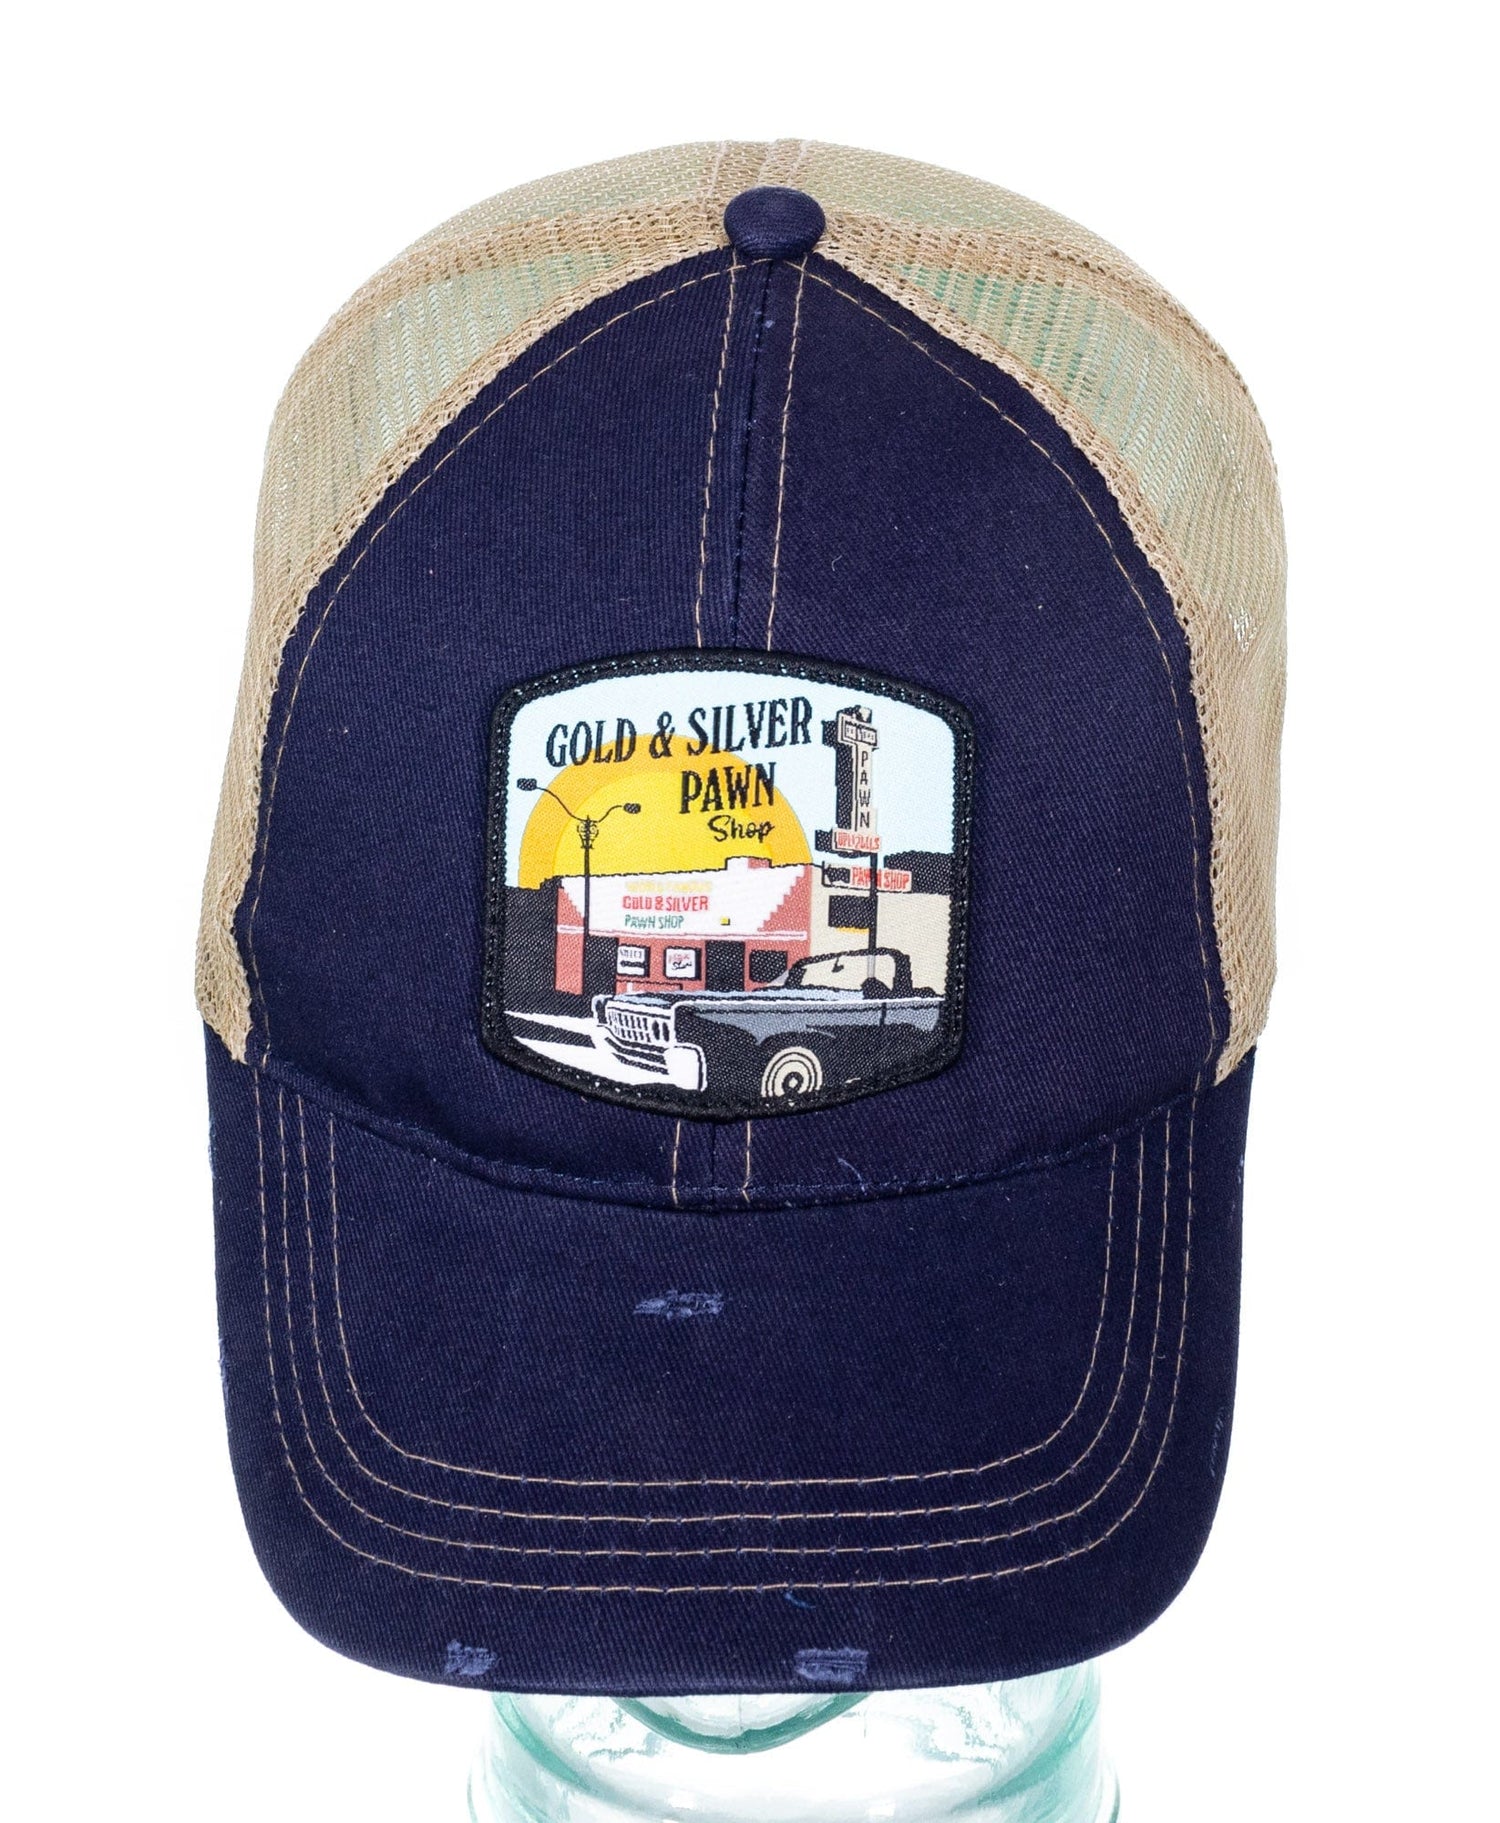 Gold & Silver Pawn Shop Adjustable Two-Tone Truckers Hat ZOOM 